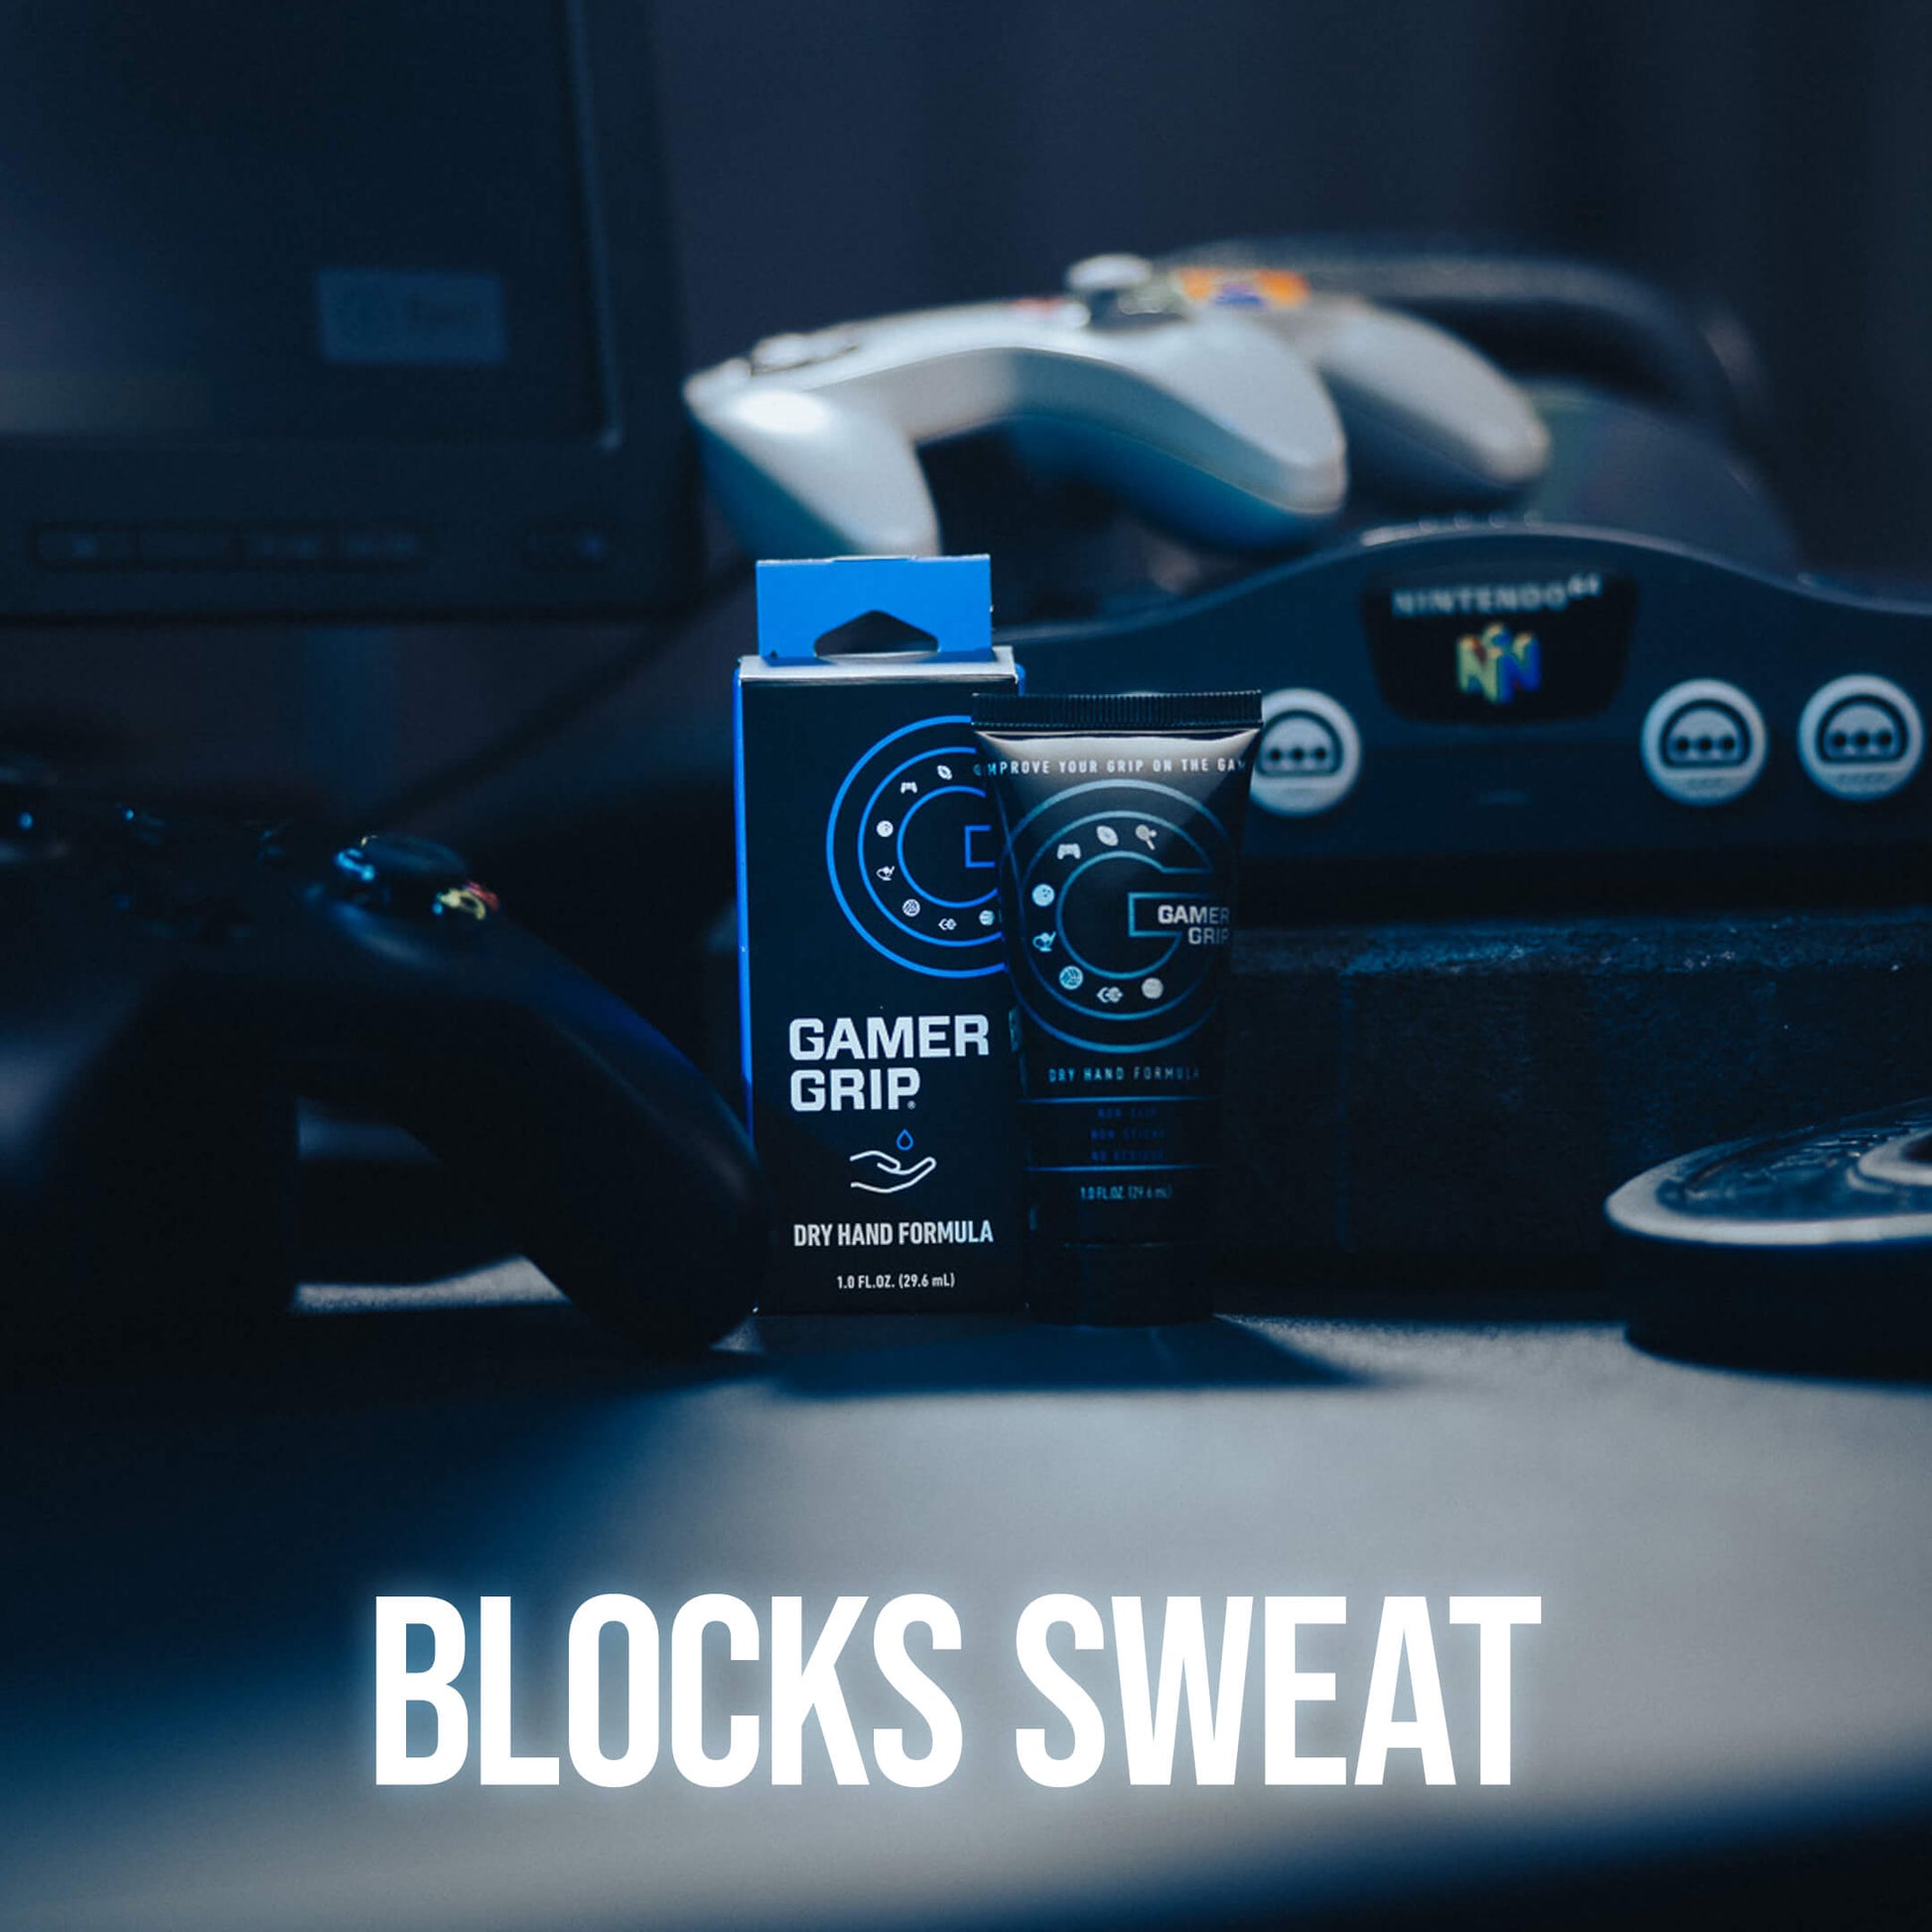 Gamer Grip product in gaming setting with Blocks Sweat text over